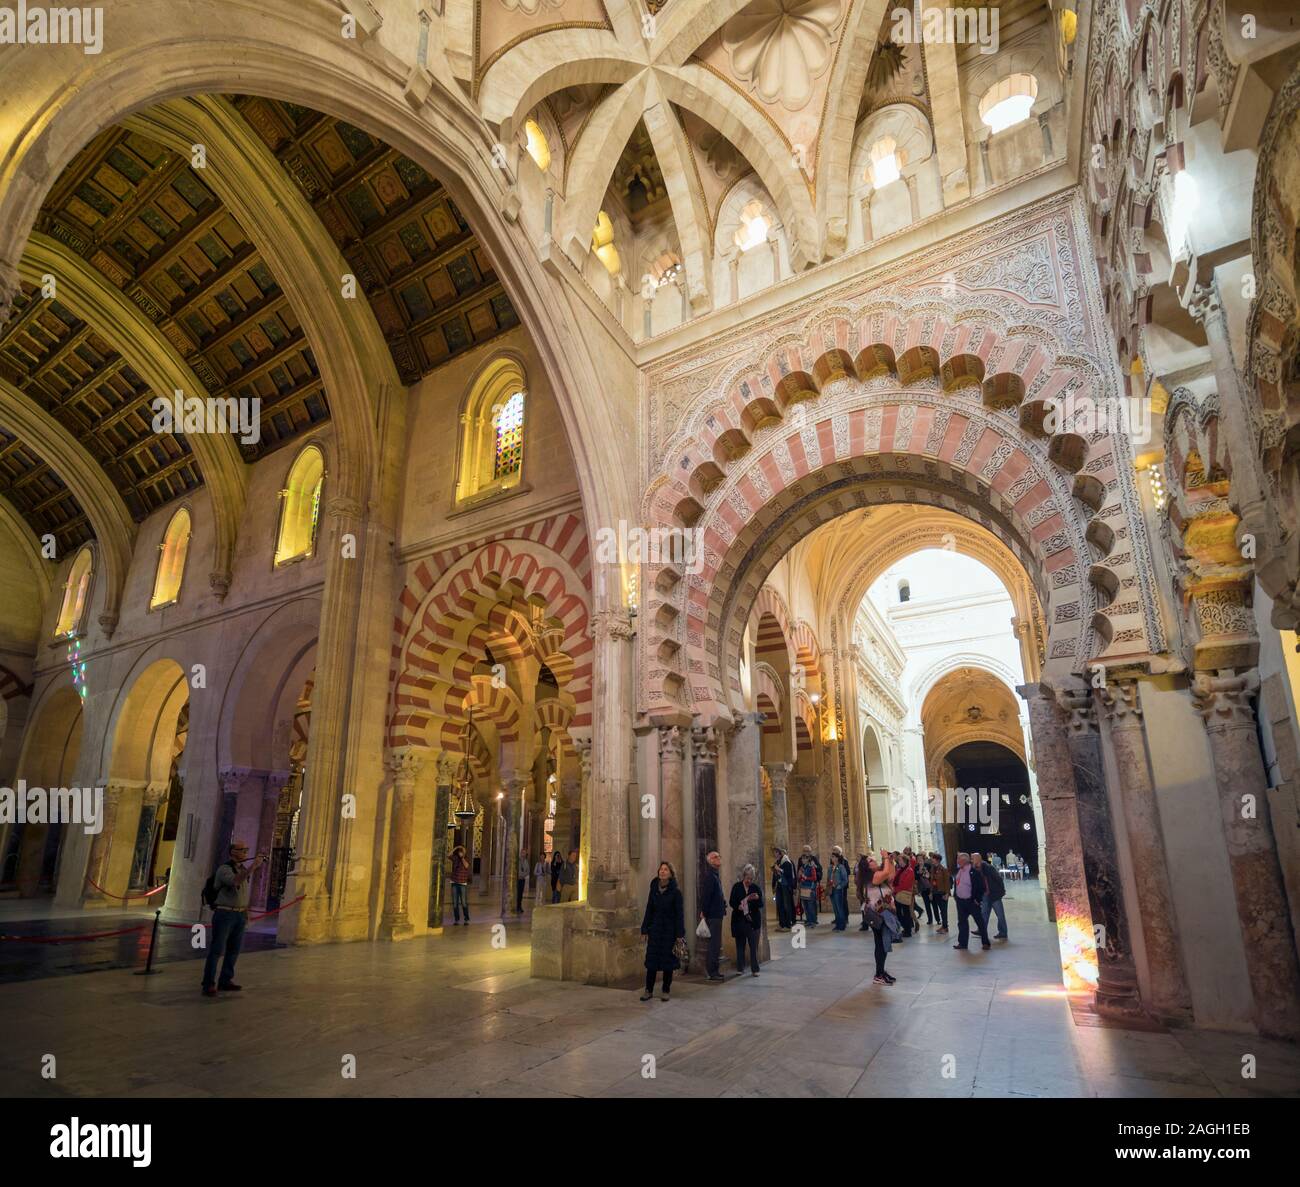 Cordoba, Cordoba Province, Andalusia, southern Spain.   Interior of the Mosque, or la Mezquita, showing mixture of architectural styles, eastern and w Stock Photo